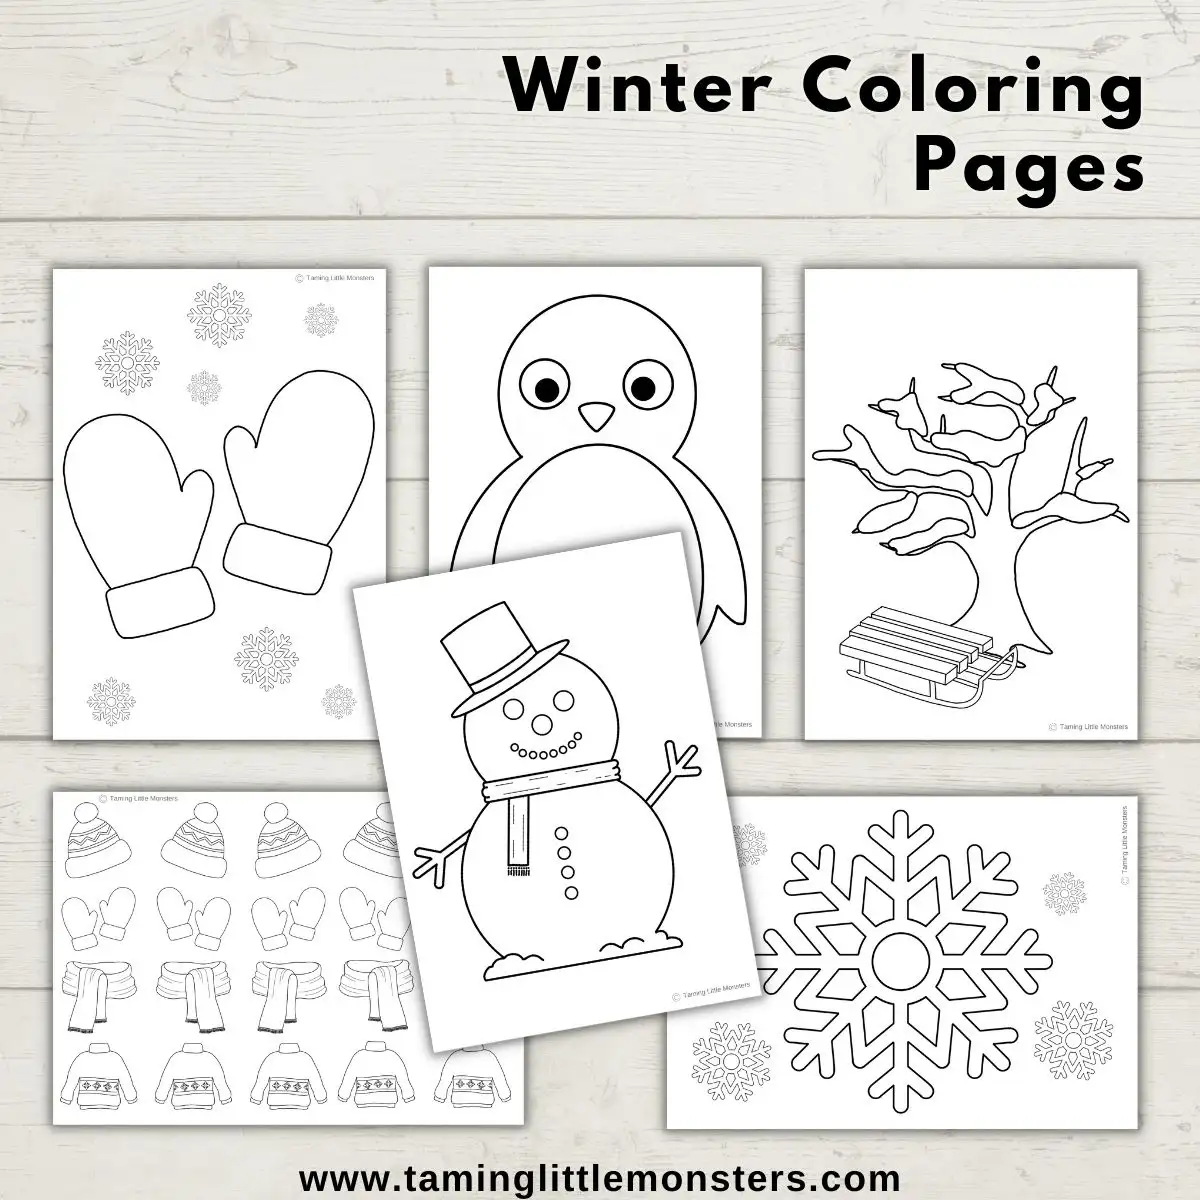 6 Free Printable Winter Coloring Pages for Kids - Taming Little Monsters